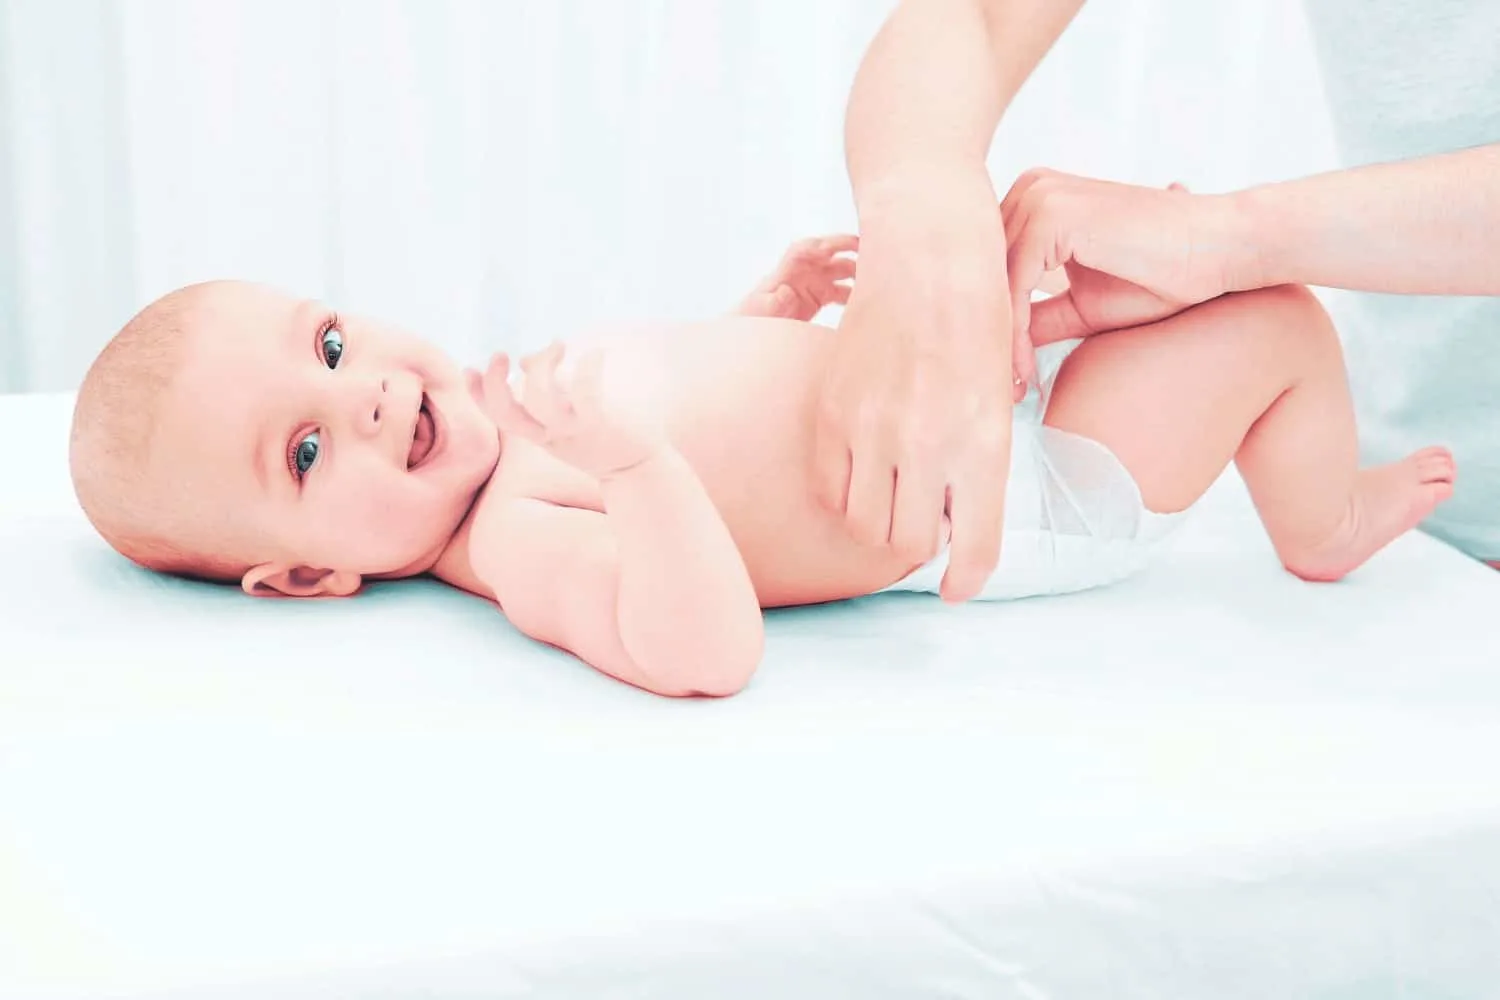 How Long Does A Baby Stay In Newborn Diapers?